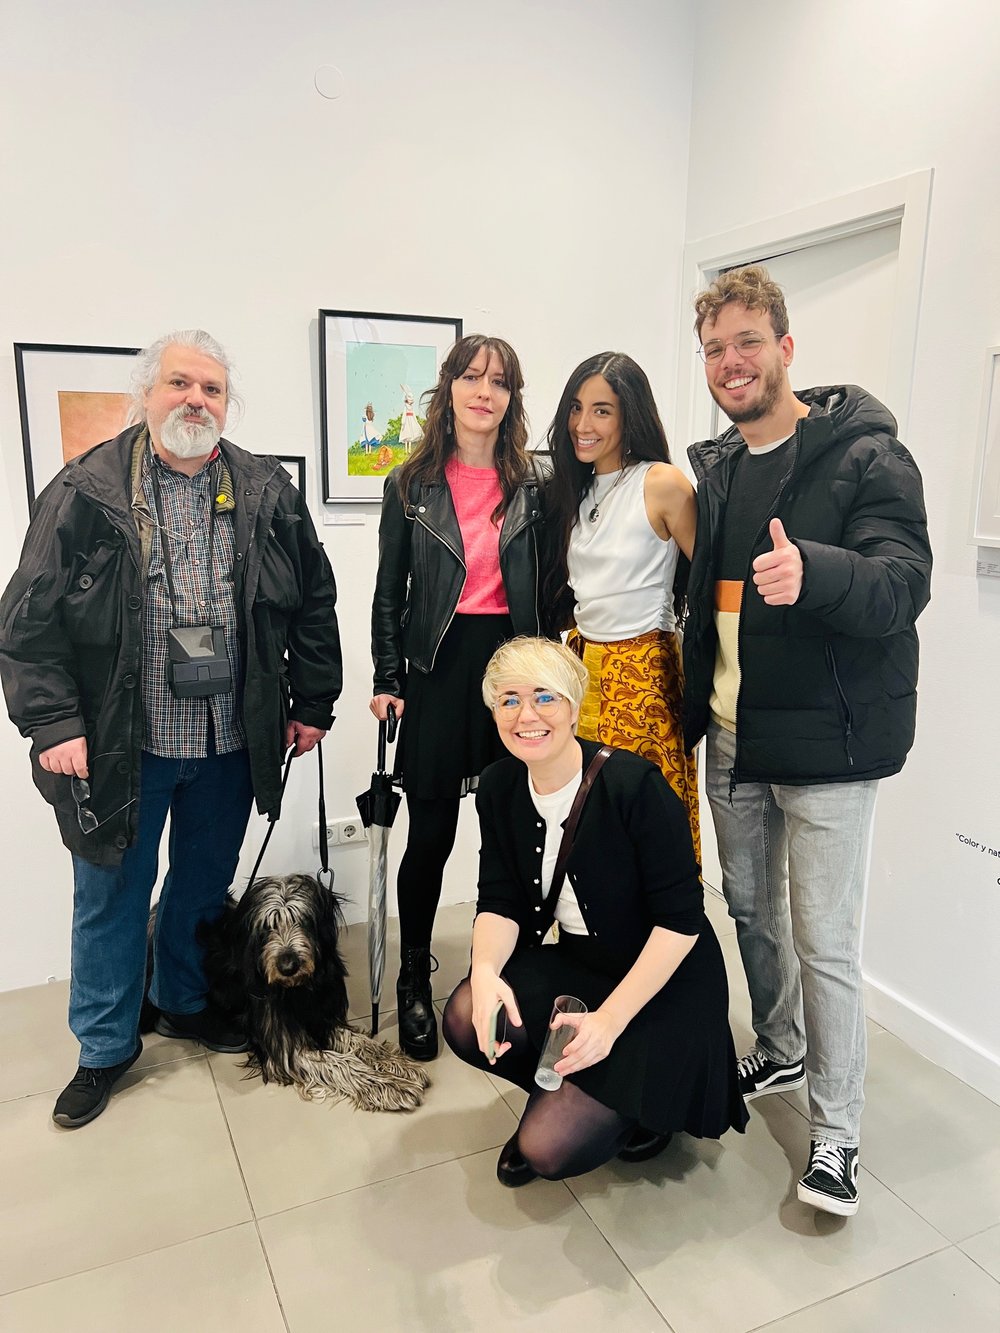 Mauro, Raquel, Kiyary, Pablo and Esther, with special appearance of Freud the dog